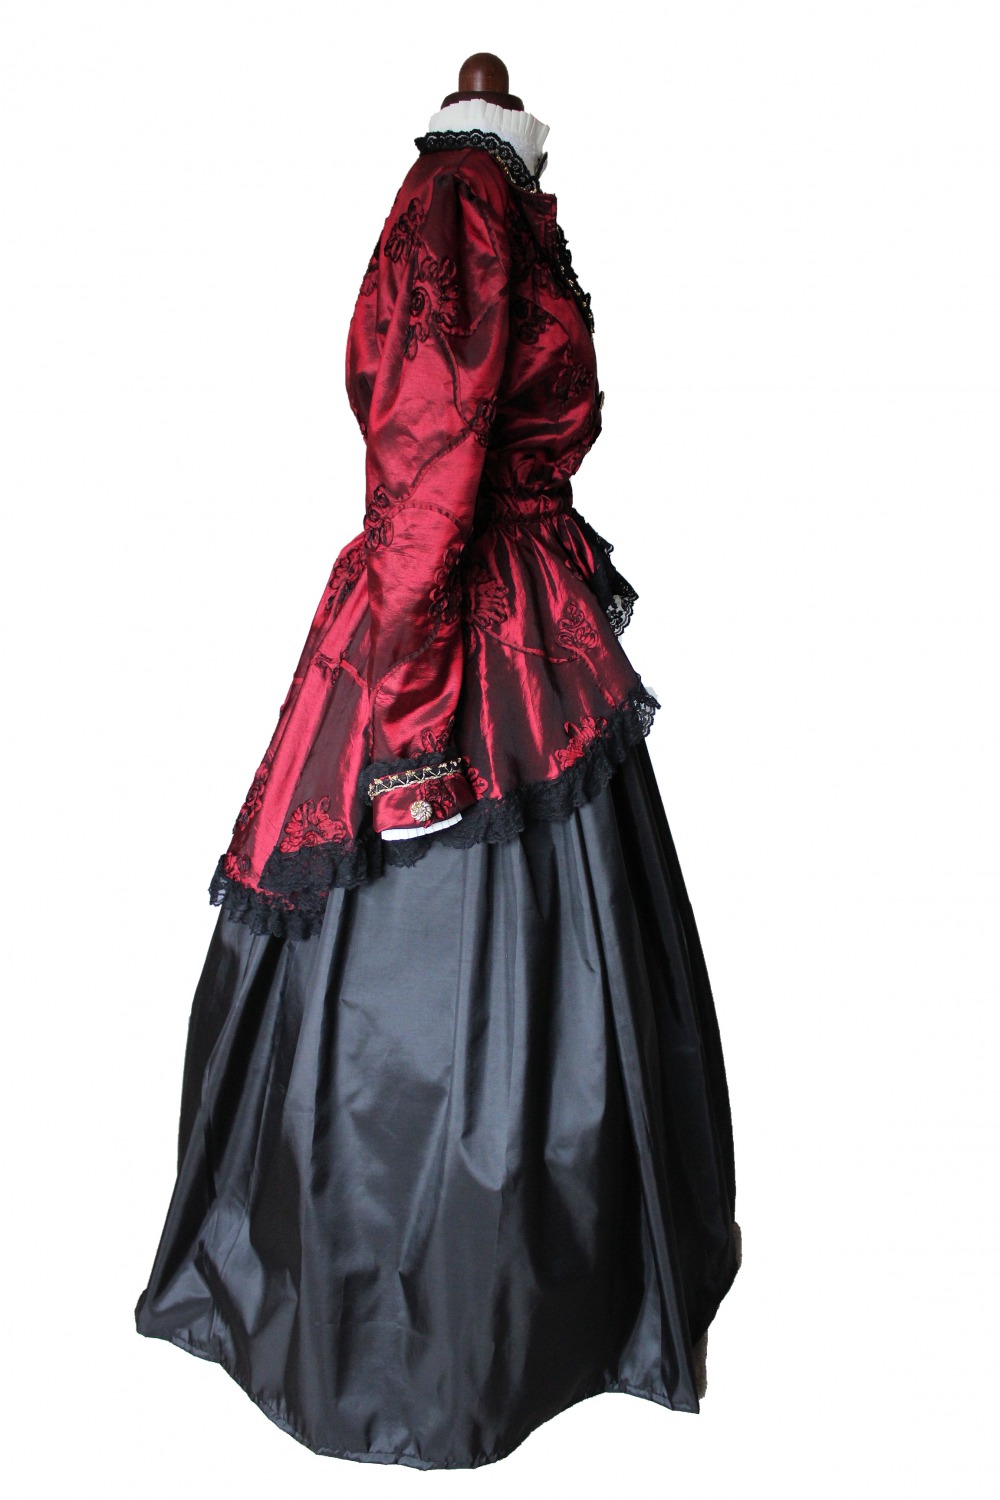 Ladies Deluxe Victorian Edwardian Day Costume Size 12 - 14  Image